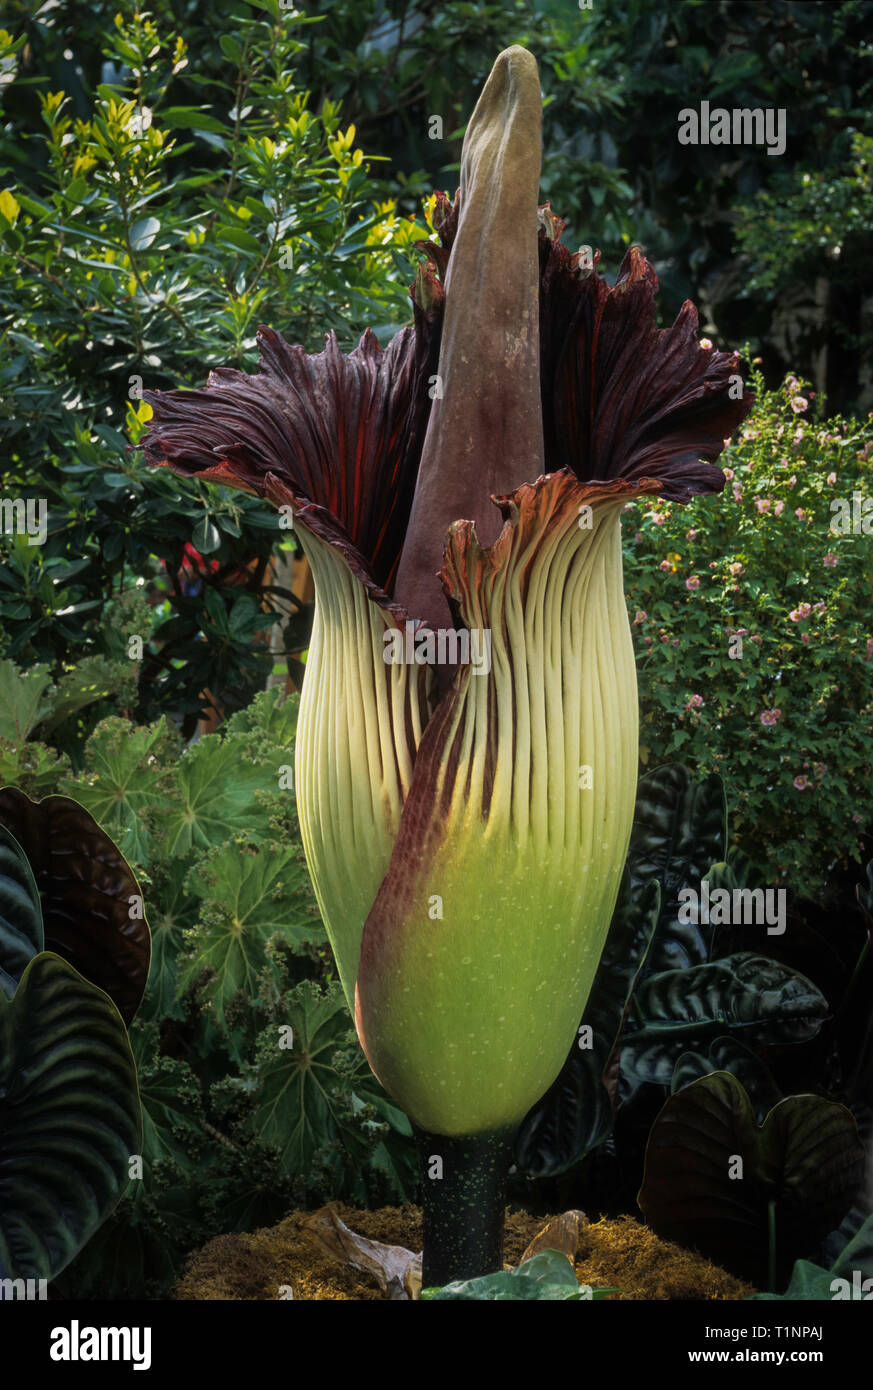 Giant arum (Amorphophallus gigas)--the world's largest flower at nearly five feet (1.5 m) tall--in bloom at the United States Botanic Garden in Washin Stock Photo